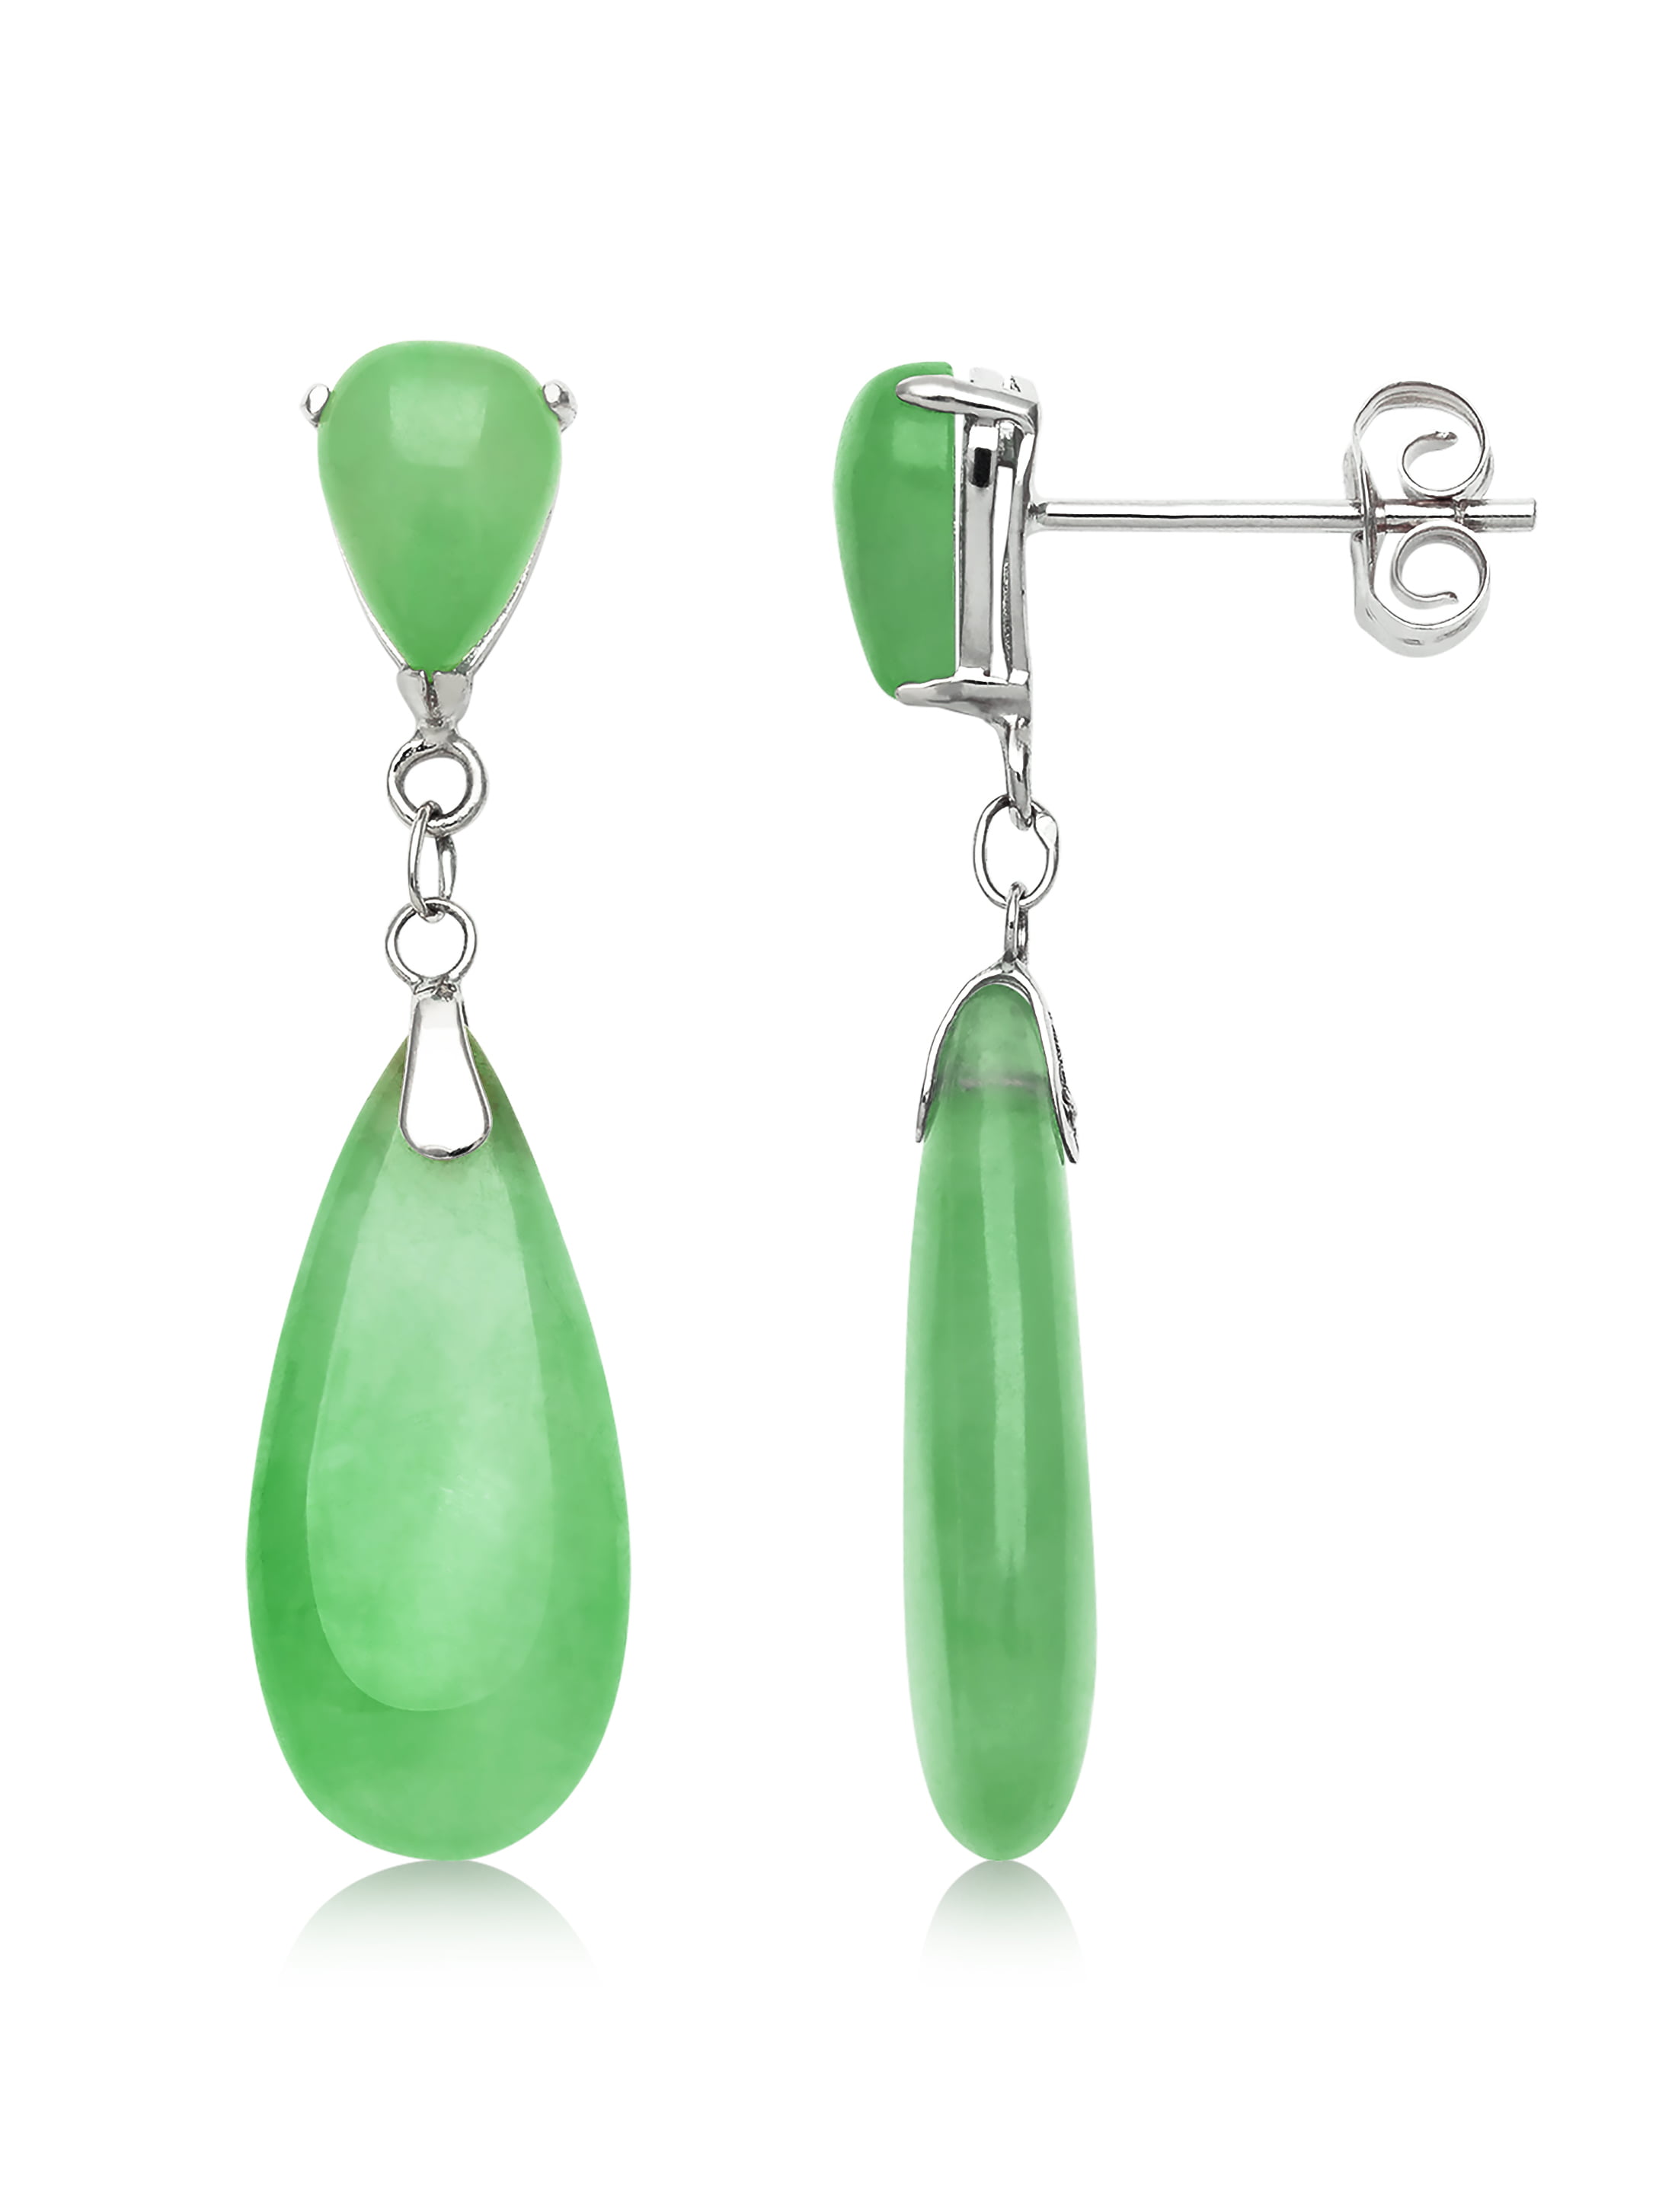 Details about   Sterling Silver Faceted JADE Gemstone Long Dangle Earrings #1146...Handmade USA 